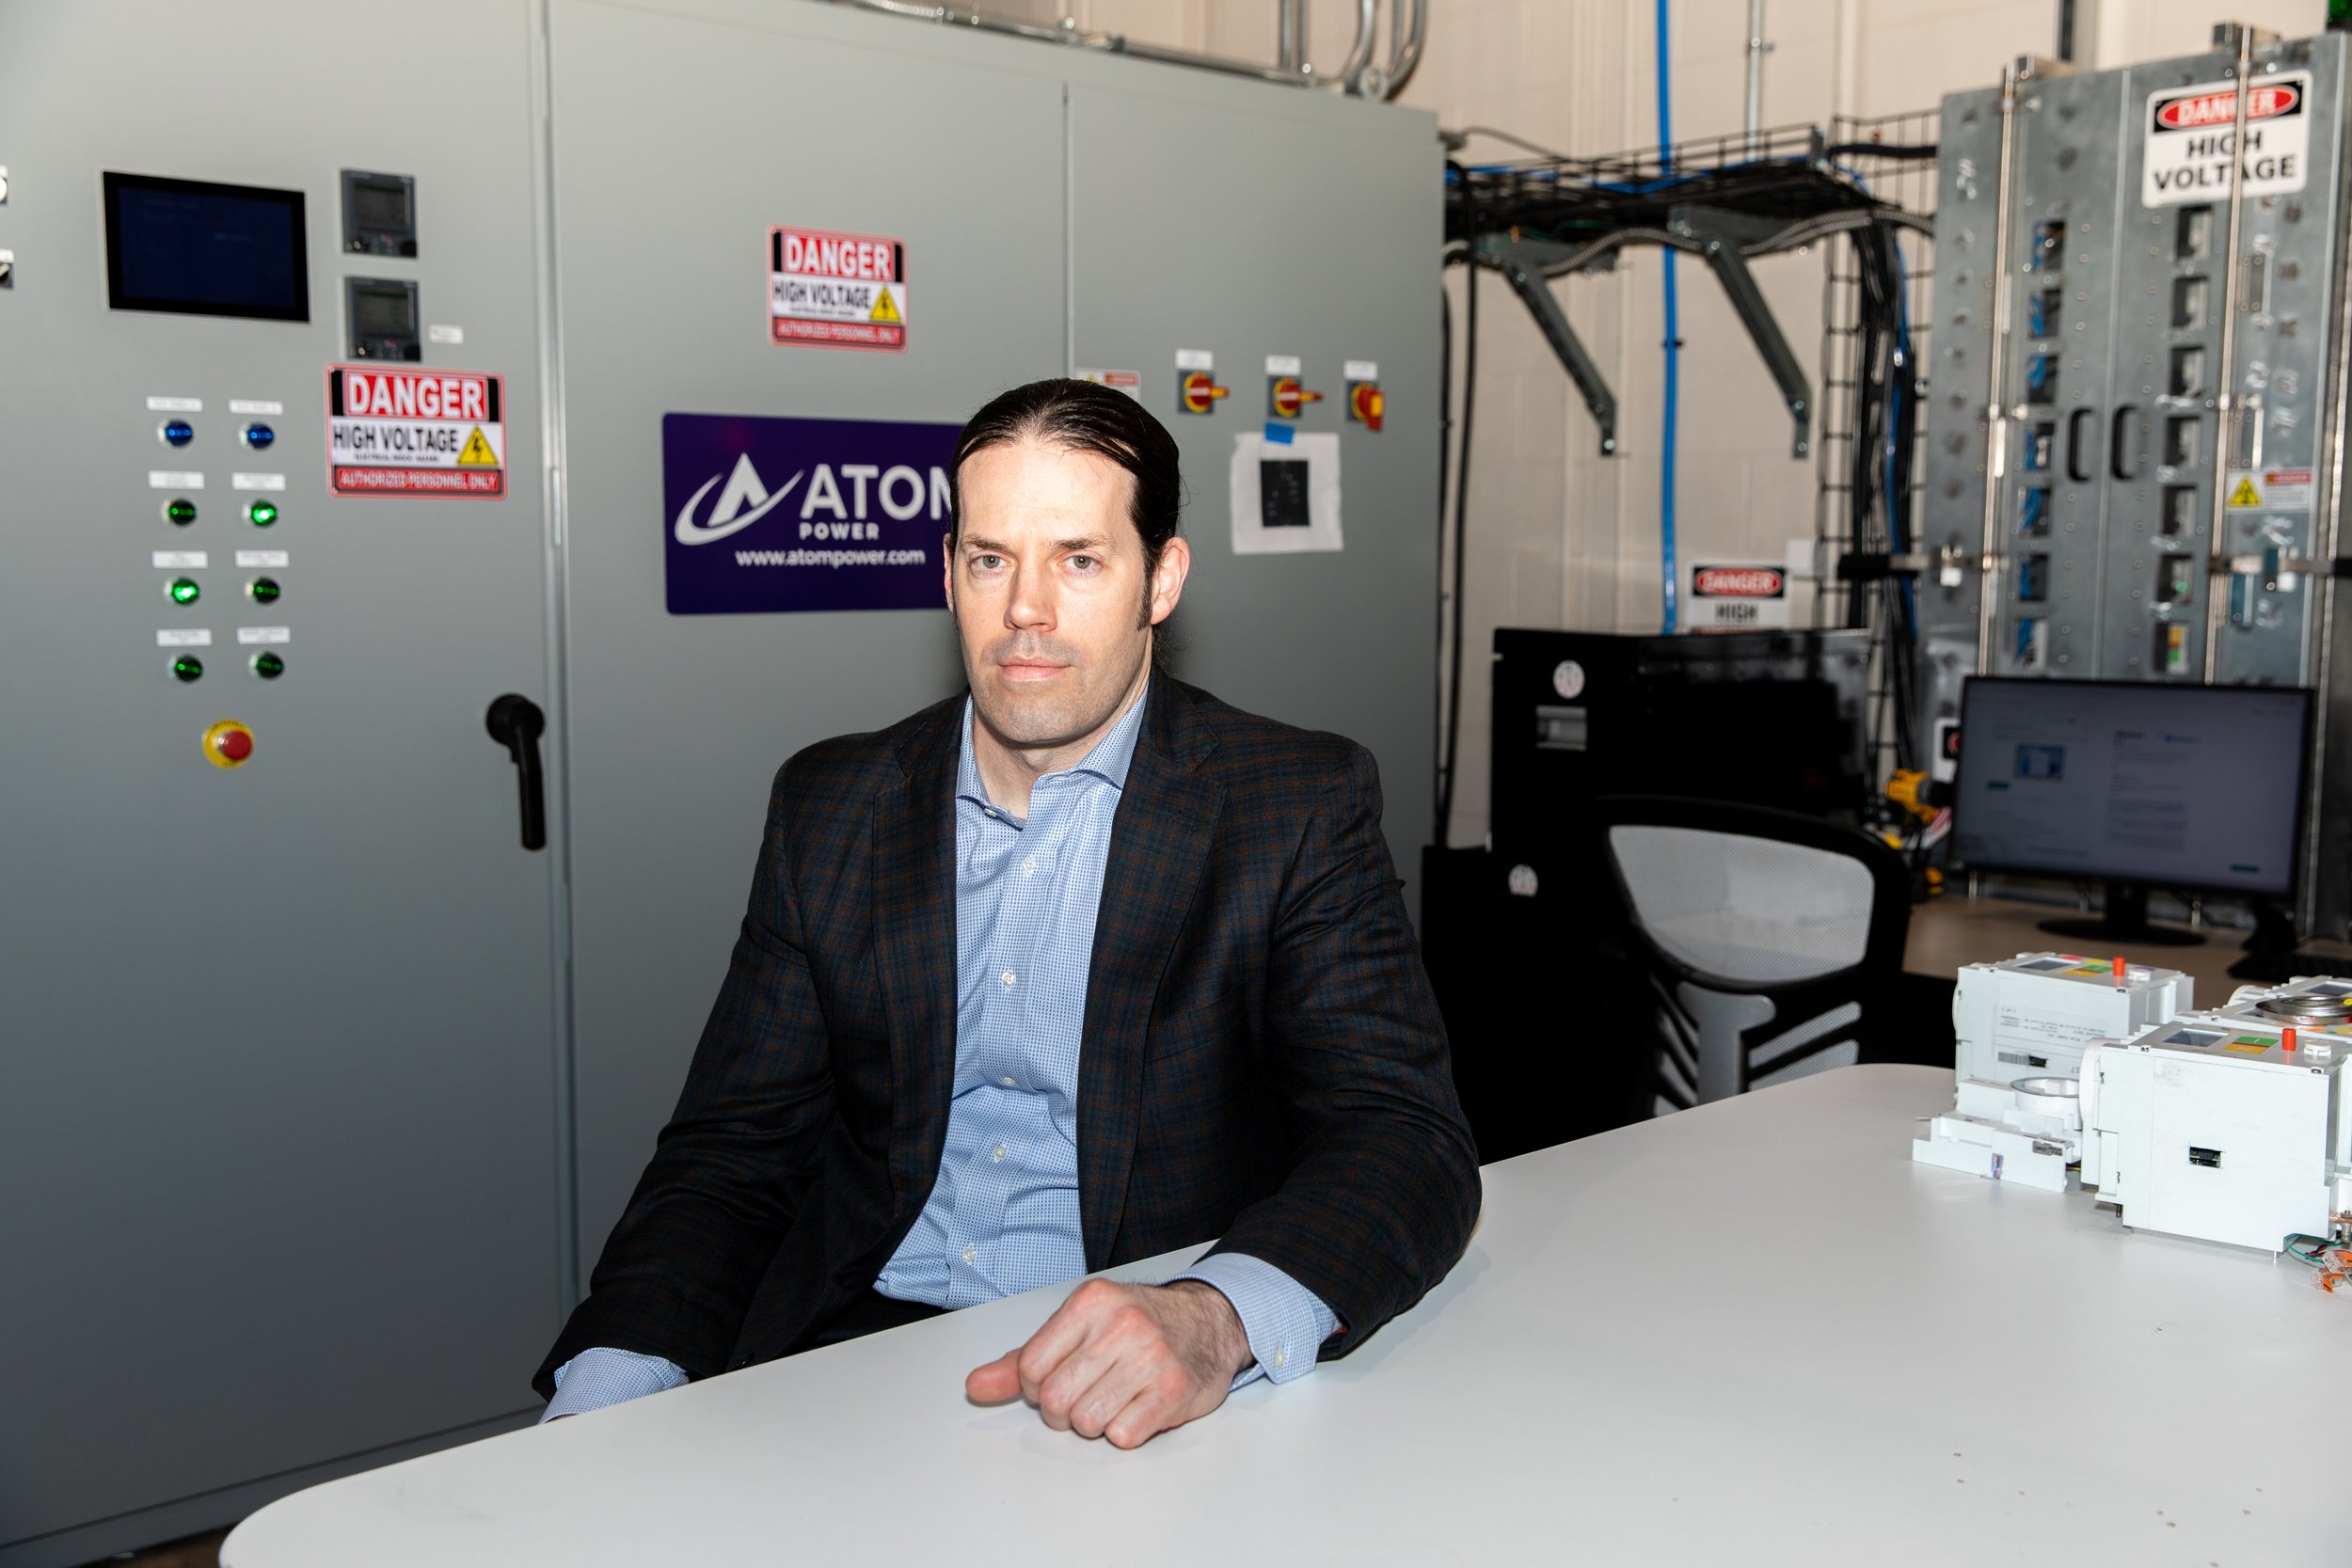  Atom Power CEO Ryan Kenned poses at the company’s headquarters in Huntersville, NC on Friday, January 27, 2023. Atom Power designs and creates EV charging solutions, which utilize a solid-state digital circuit breaker that charges from a centralized